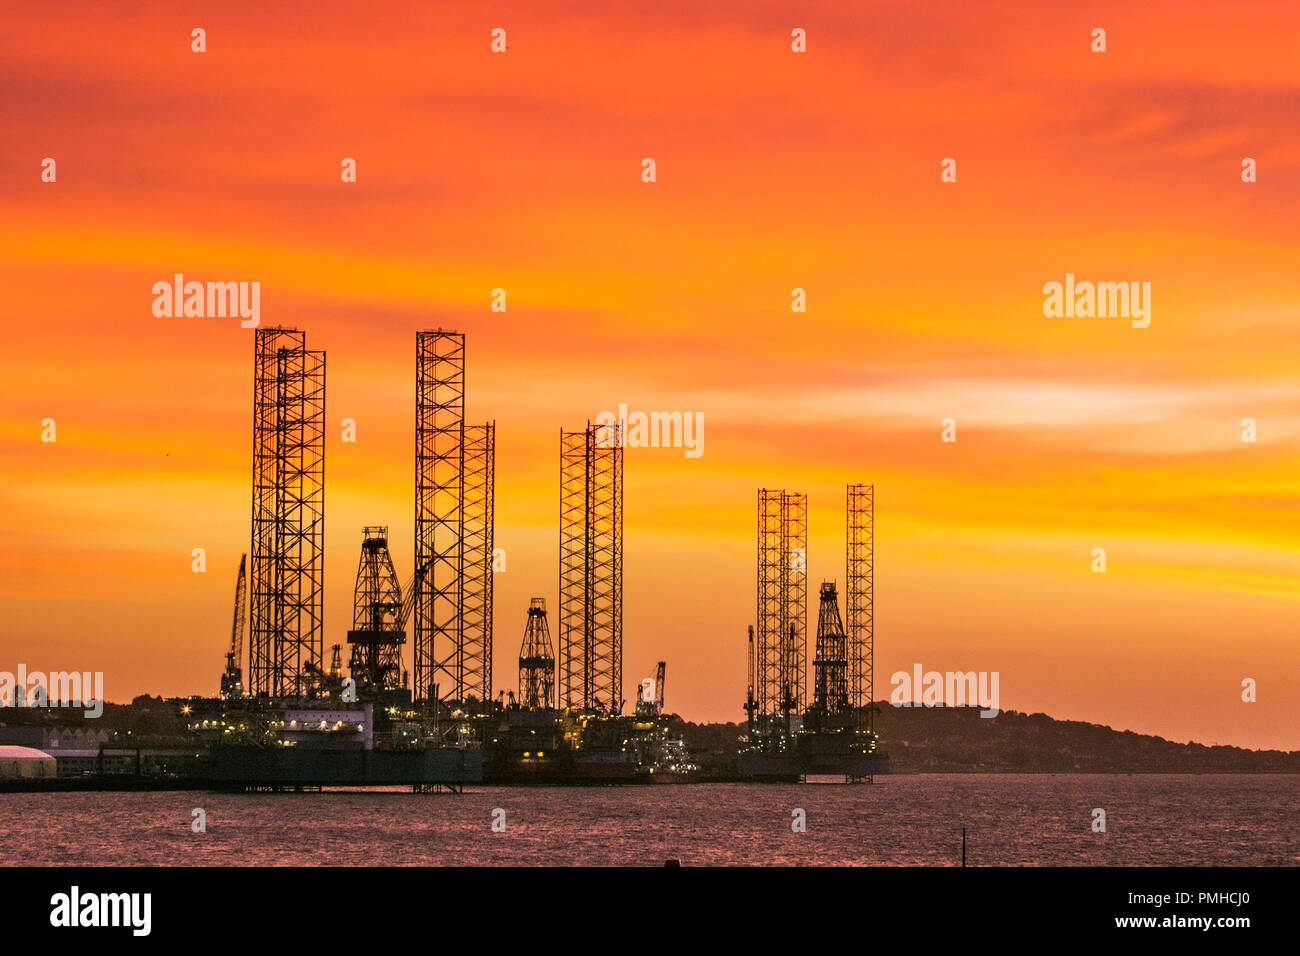 Jack up rigs oil and gas industry in the Port of Dundee, Scotland. UK Weather Sep 2018.  Colourful start to the day at Tayside Docks where three jack-up rigs, oil rig platforms are undergoing service and maintenance at the riverside facility on the River Tay estuary.  The slowdown in the North Sea oil and gas industry has led to oil rigs being removed from the North Sea, with Dundee docklands providing a berthing place for them until they are required again in the future. Credit; MediaWorldNews/AlamyLiveNews. Stock Photo